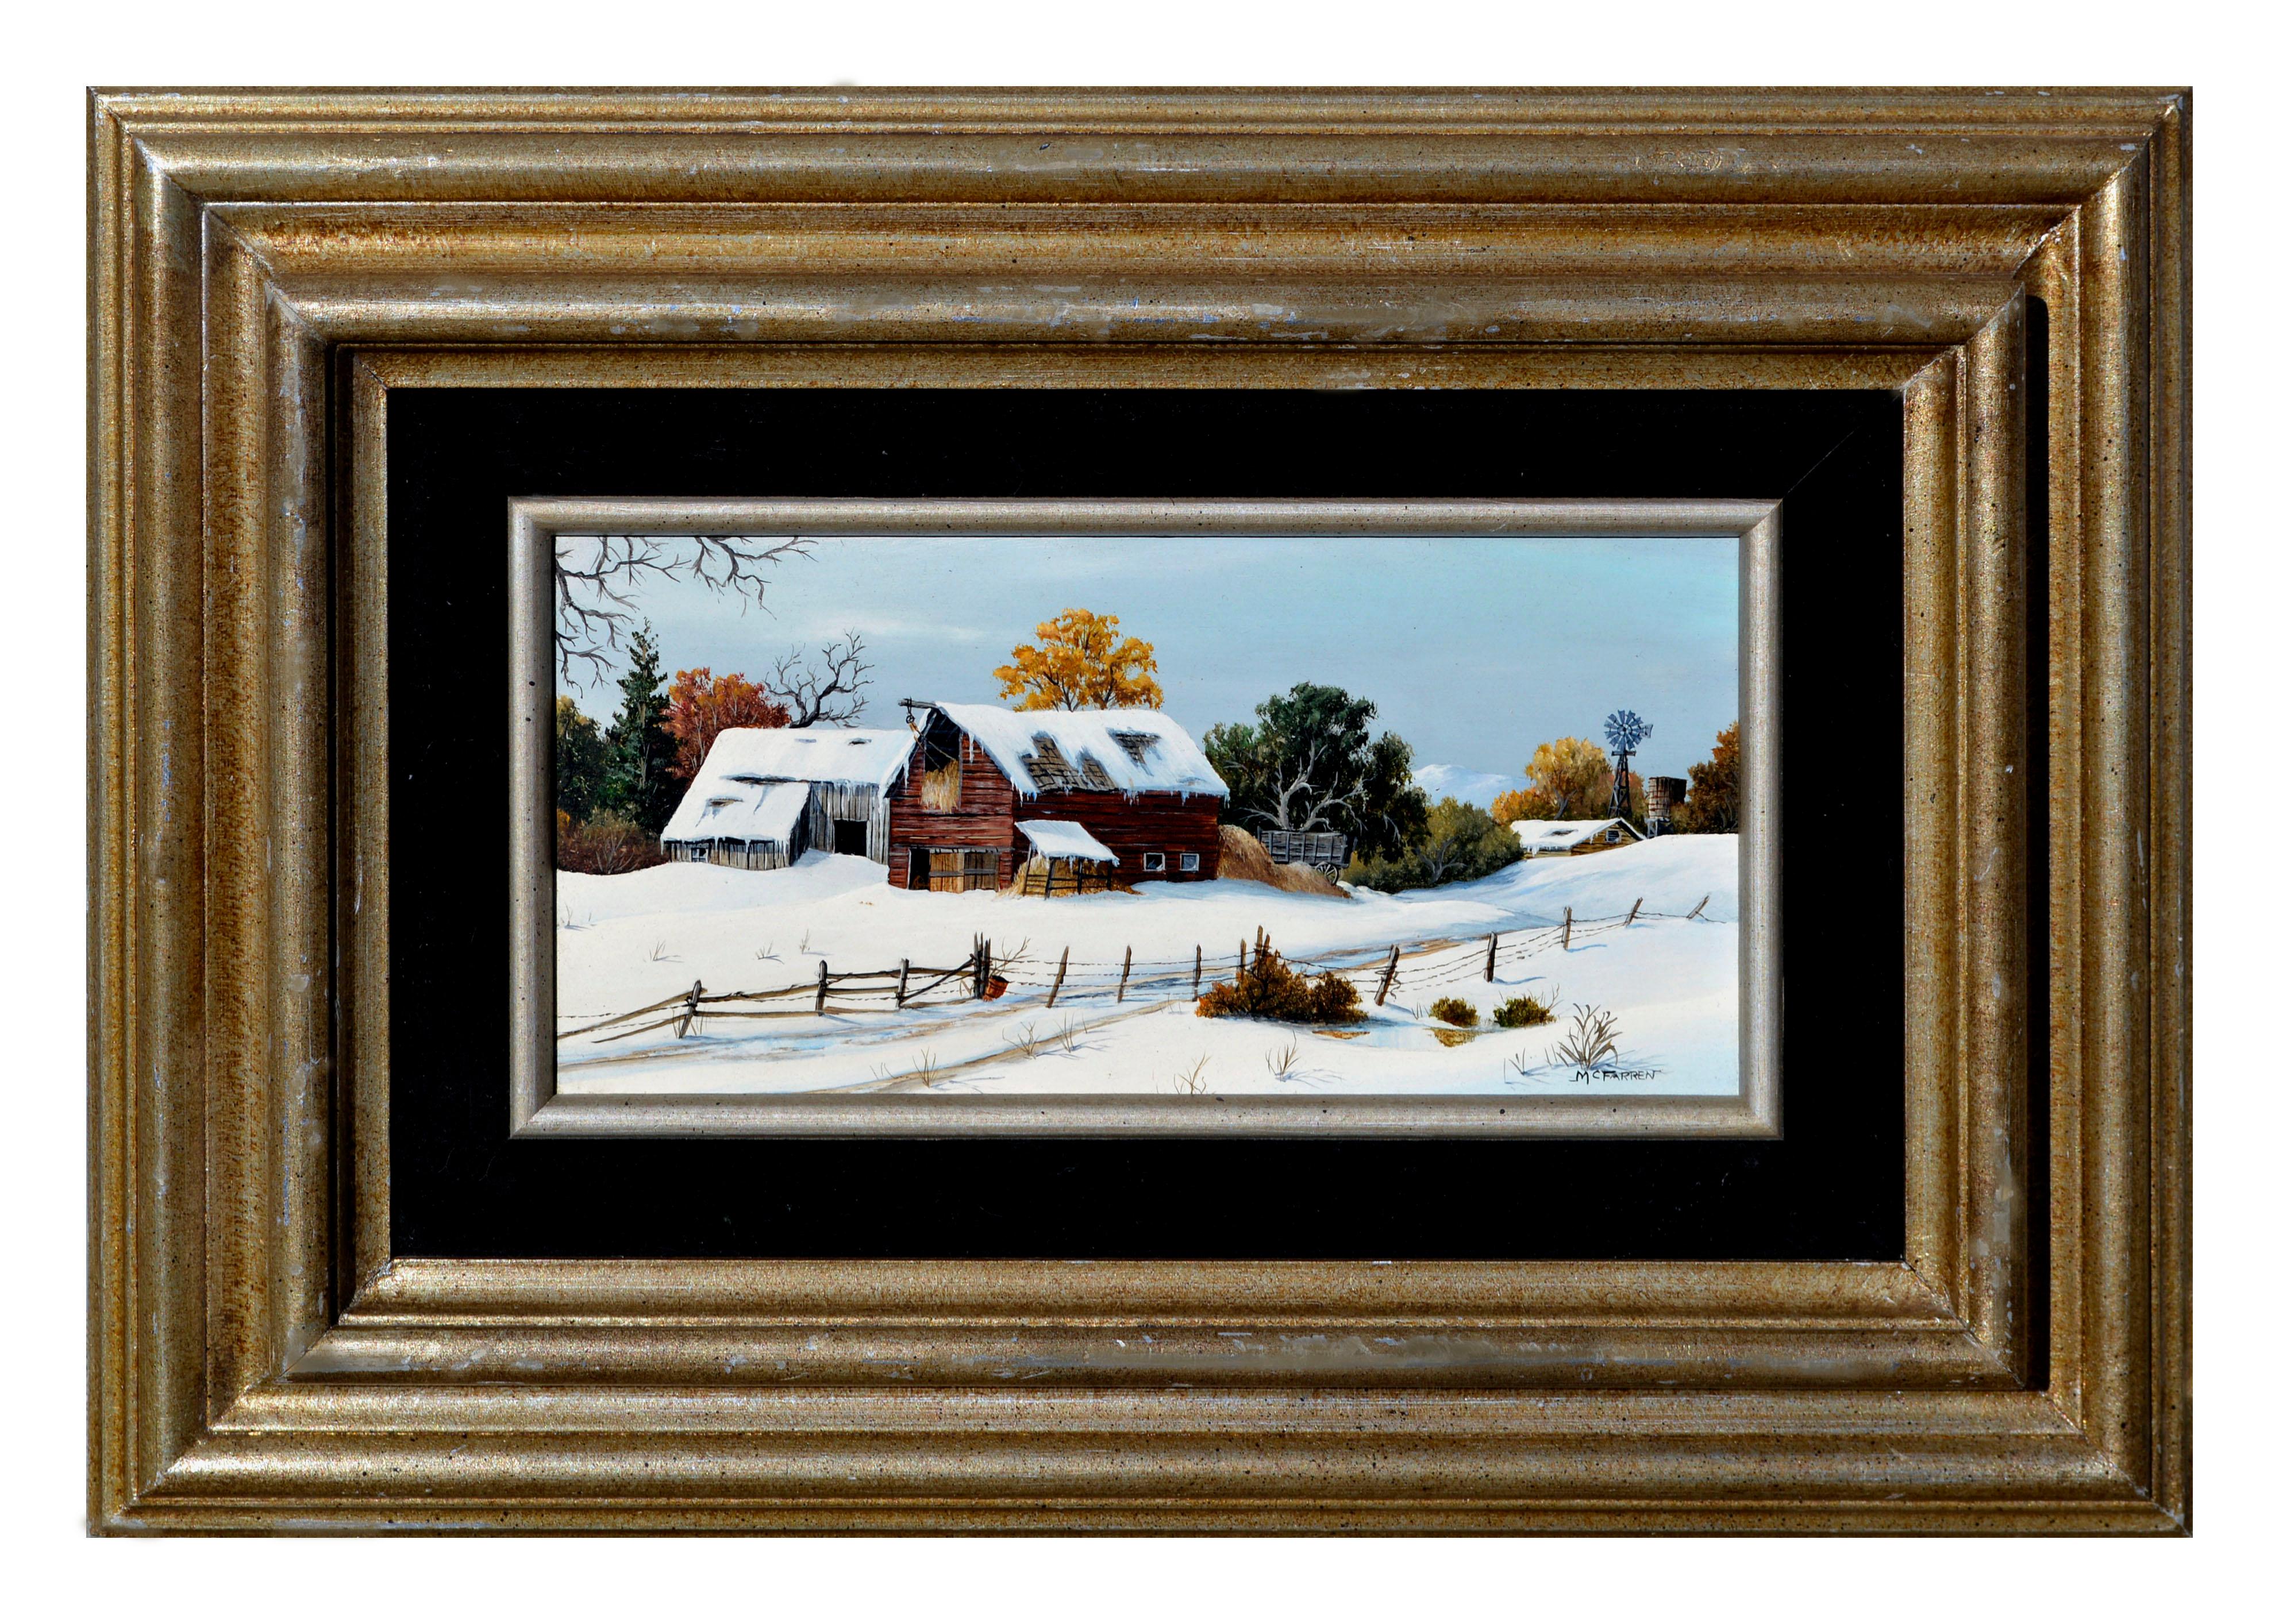 Robert F. McFarren Landscape Painting - Mid Century Barns Covered in Snow Landscape